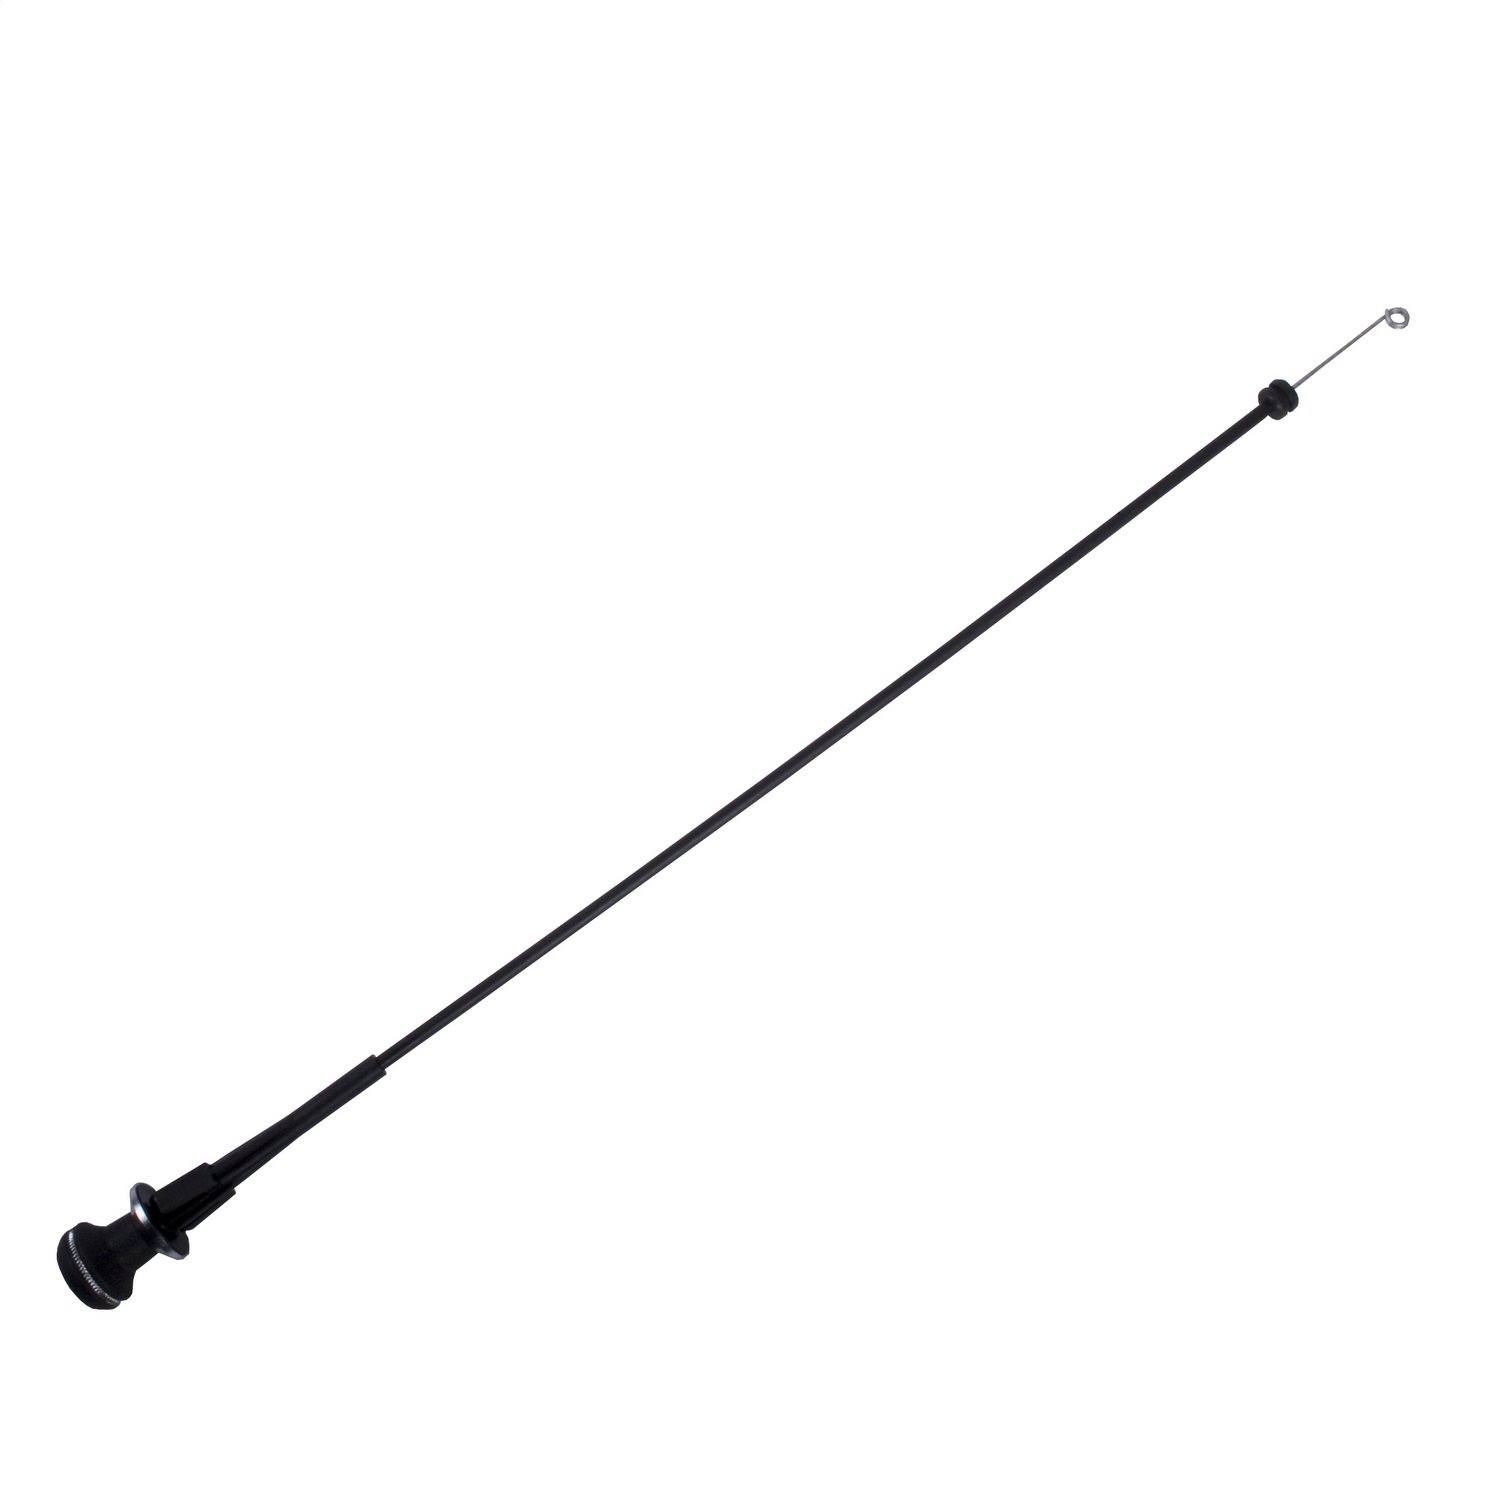 This defroster/heater cable from Omix-ADA fits 78-86 Jeep CJ models. 21 inches long